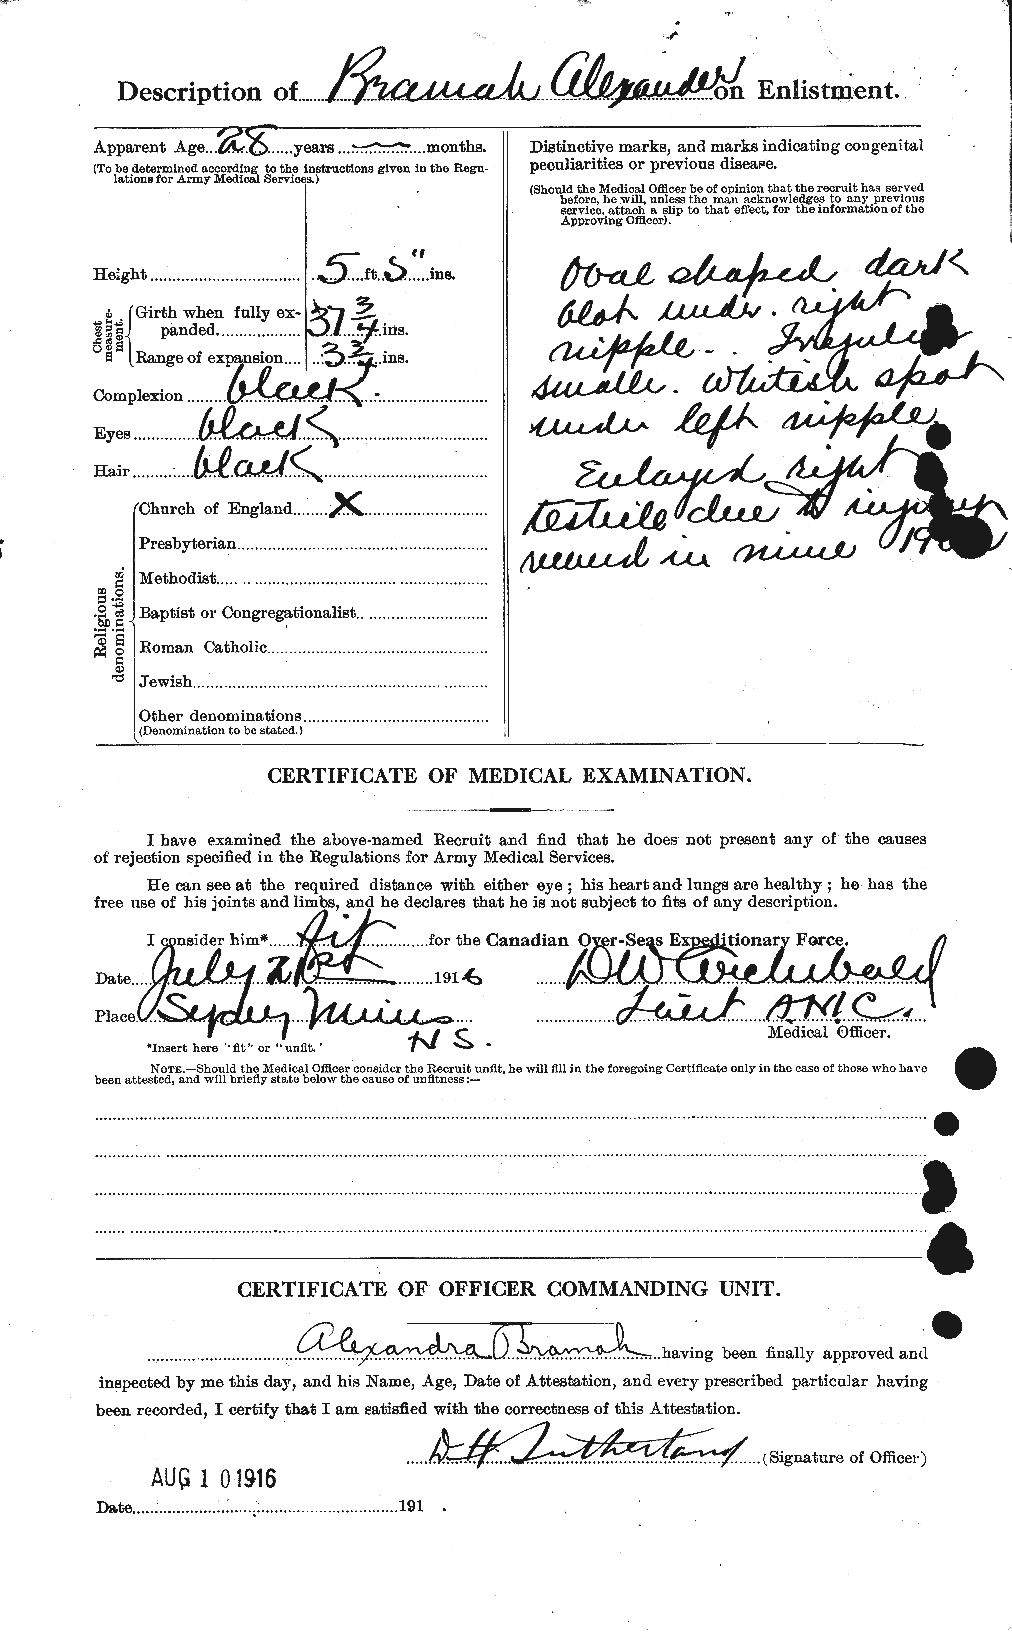 Personnel Records of the First World War - CEF 259567b